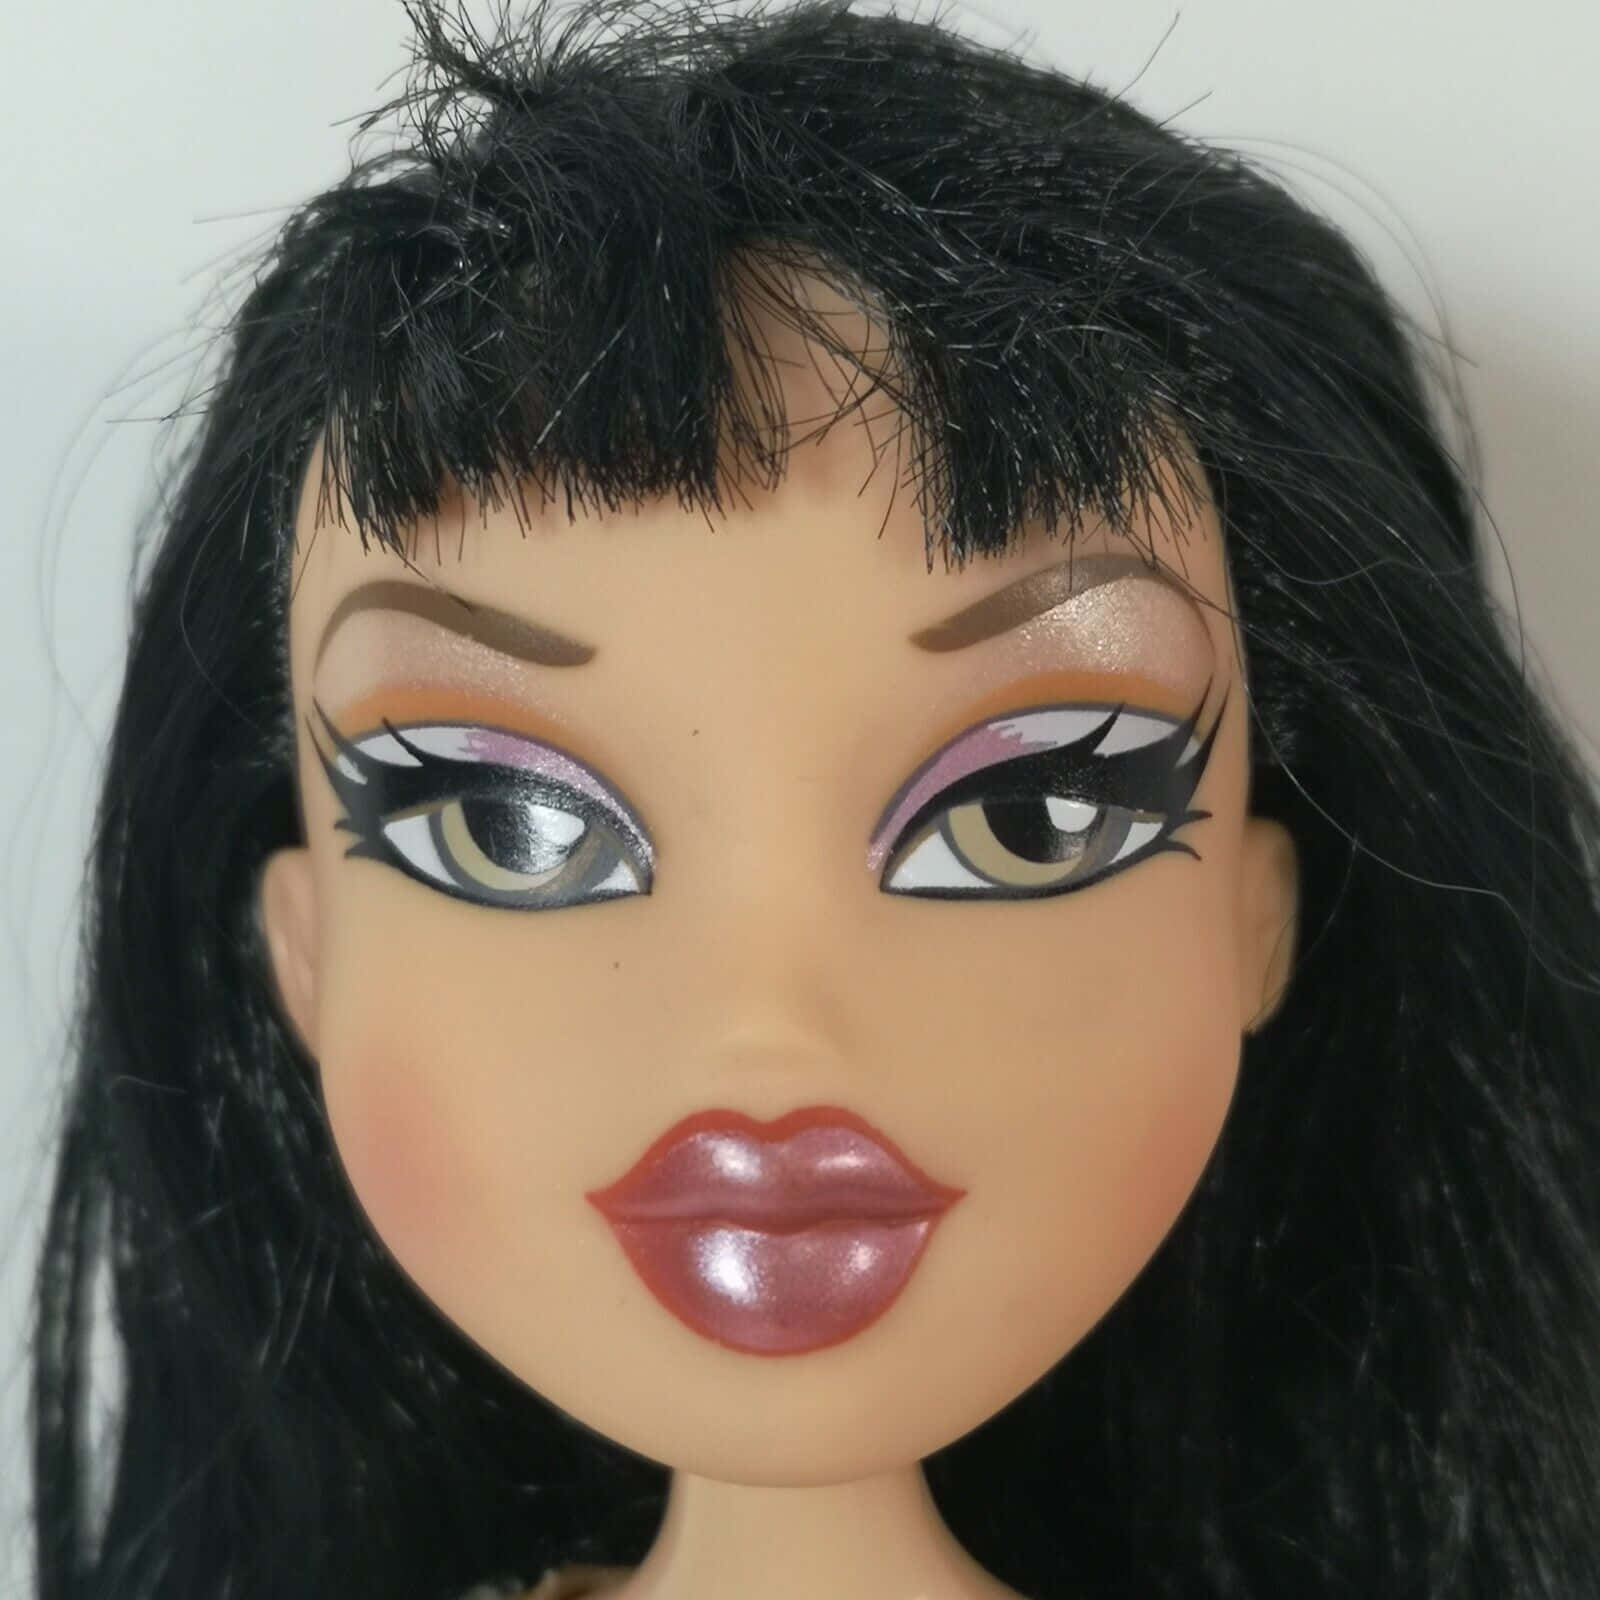 Have Fun with Your Friends While Rocking Your Personal Style with Bratz Aesthetic!